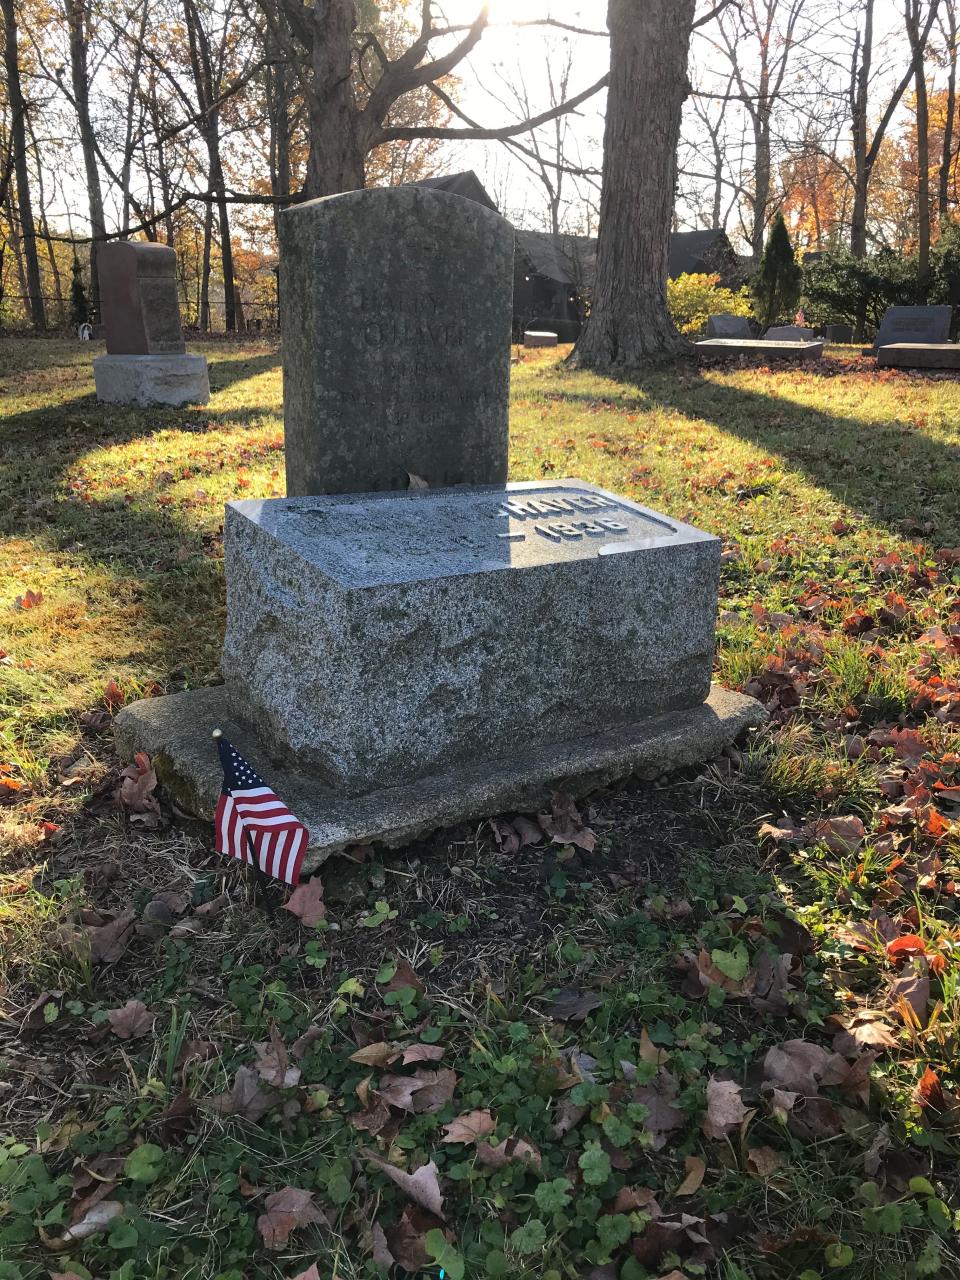 U.S. flags are placed at the graves of  the 13 military veterans in the cemetery  by Sue Faulk. Her father is among them.